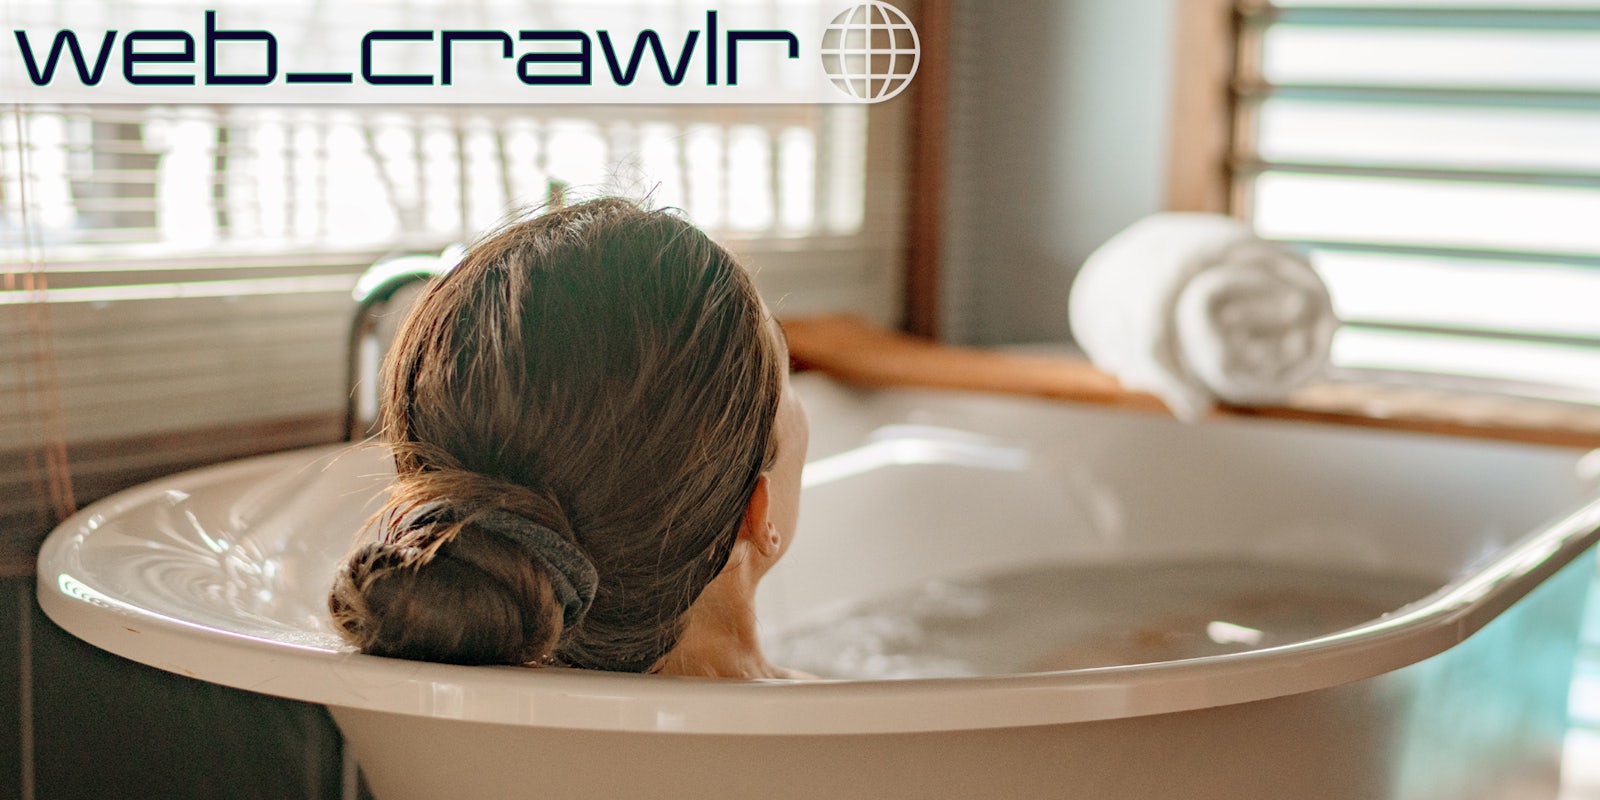 A woman in a bathtub. The Daily Dot newsletter web_crawlr logo is in the top left corner.